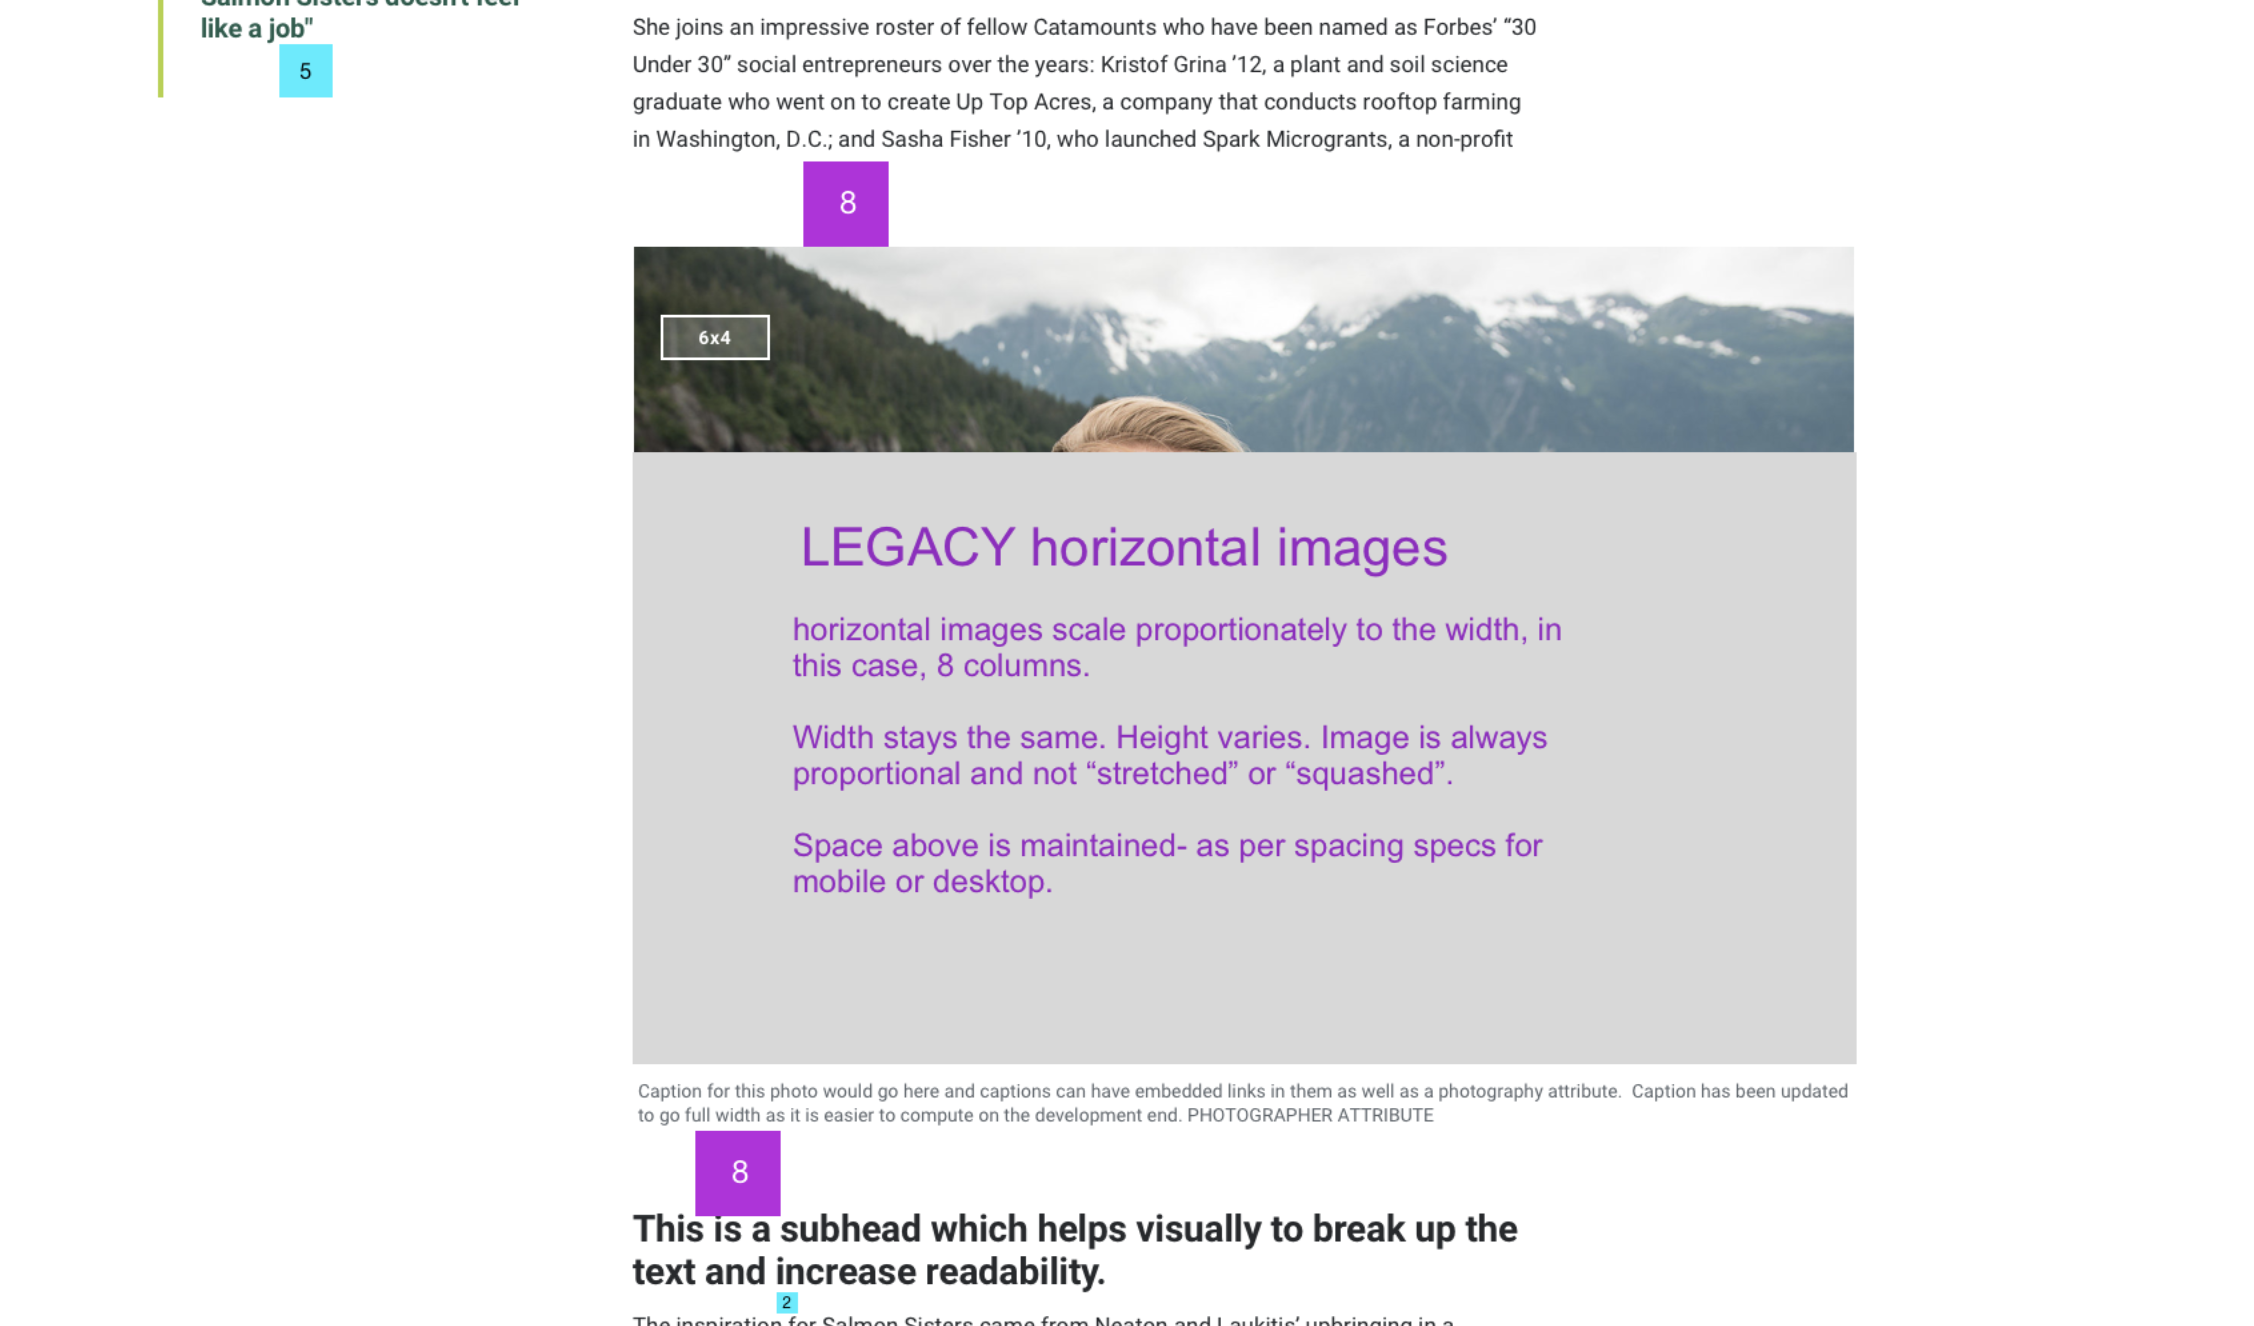 new inline image with a horizontal orientation. a smaller  gray box overlay represents how a legacy 800x400 image would appear.